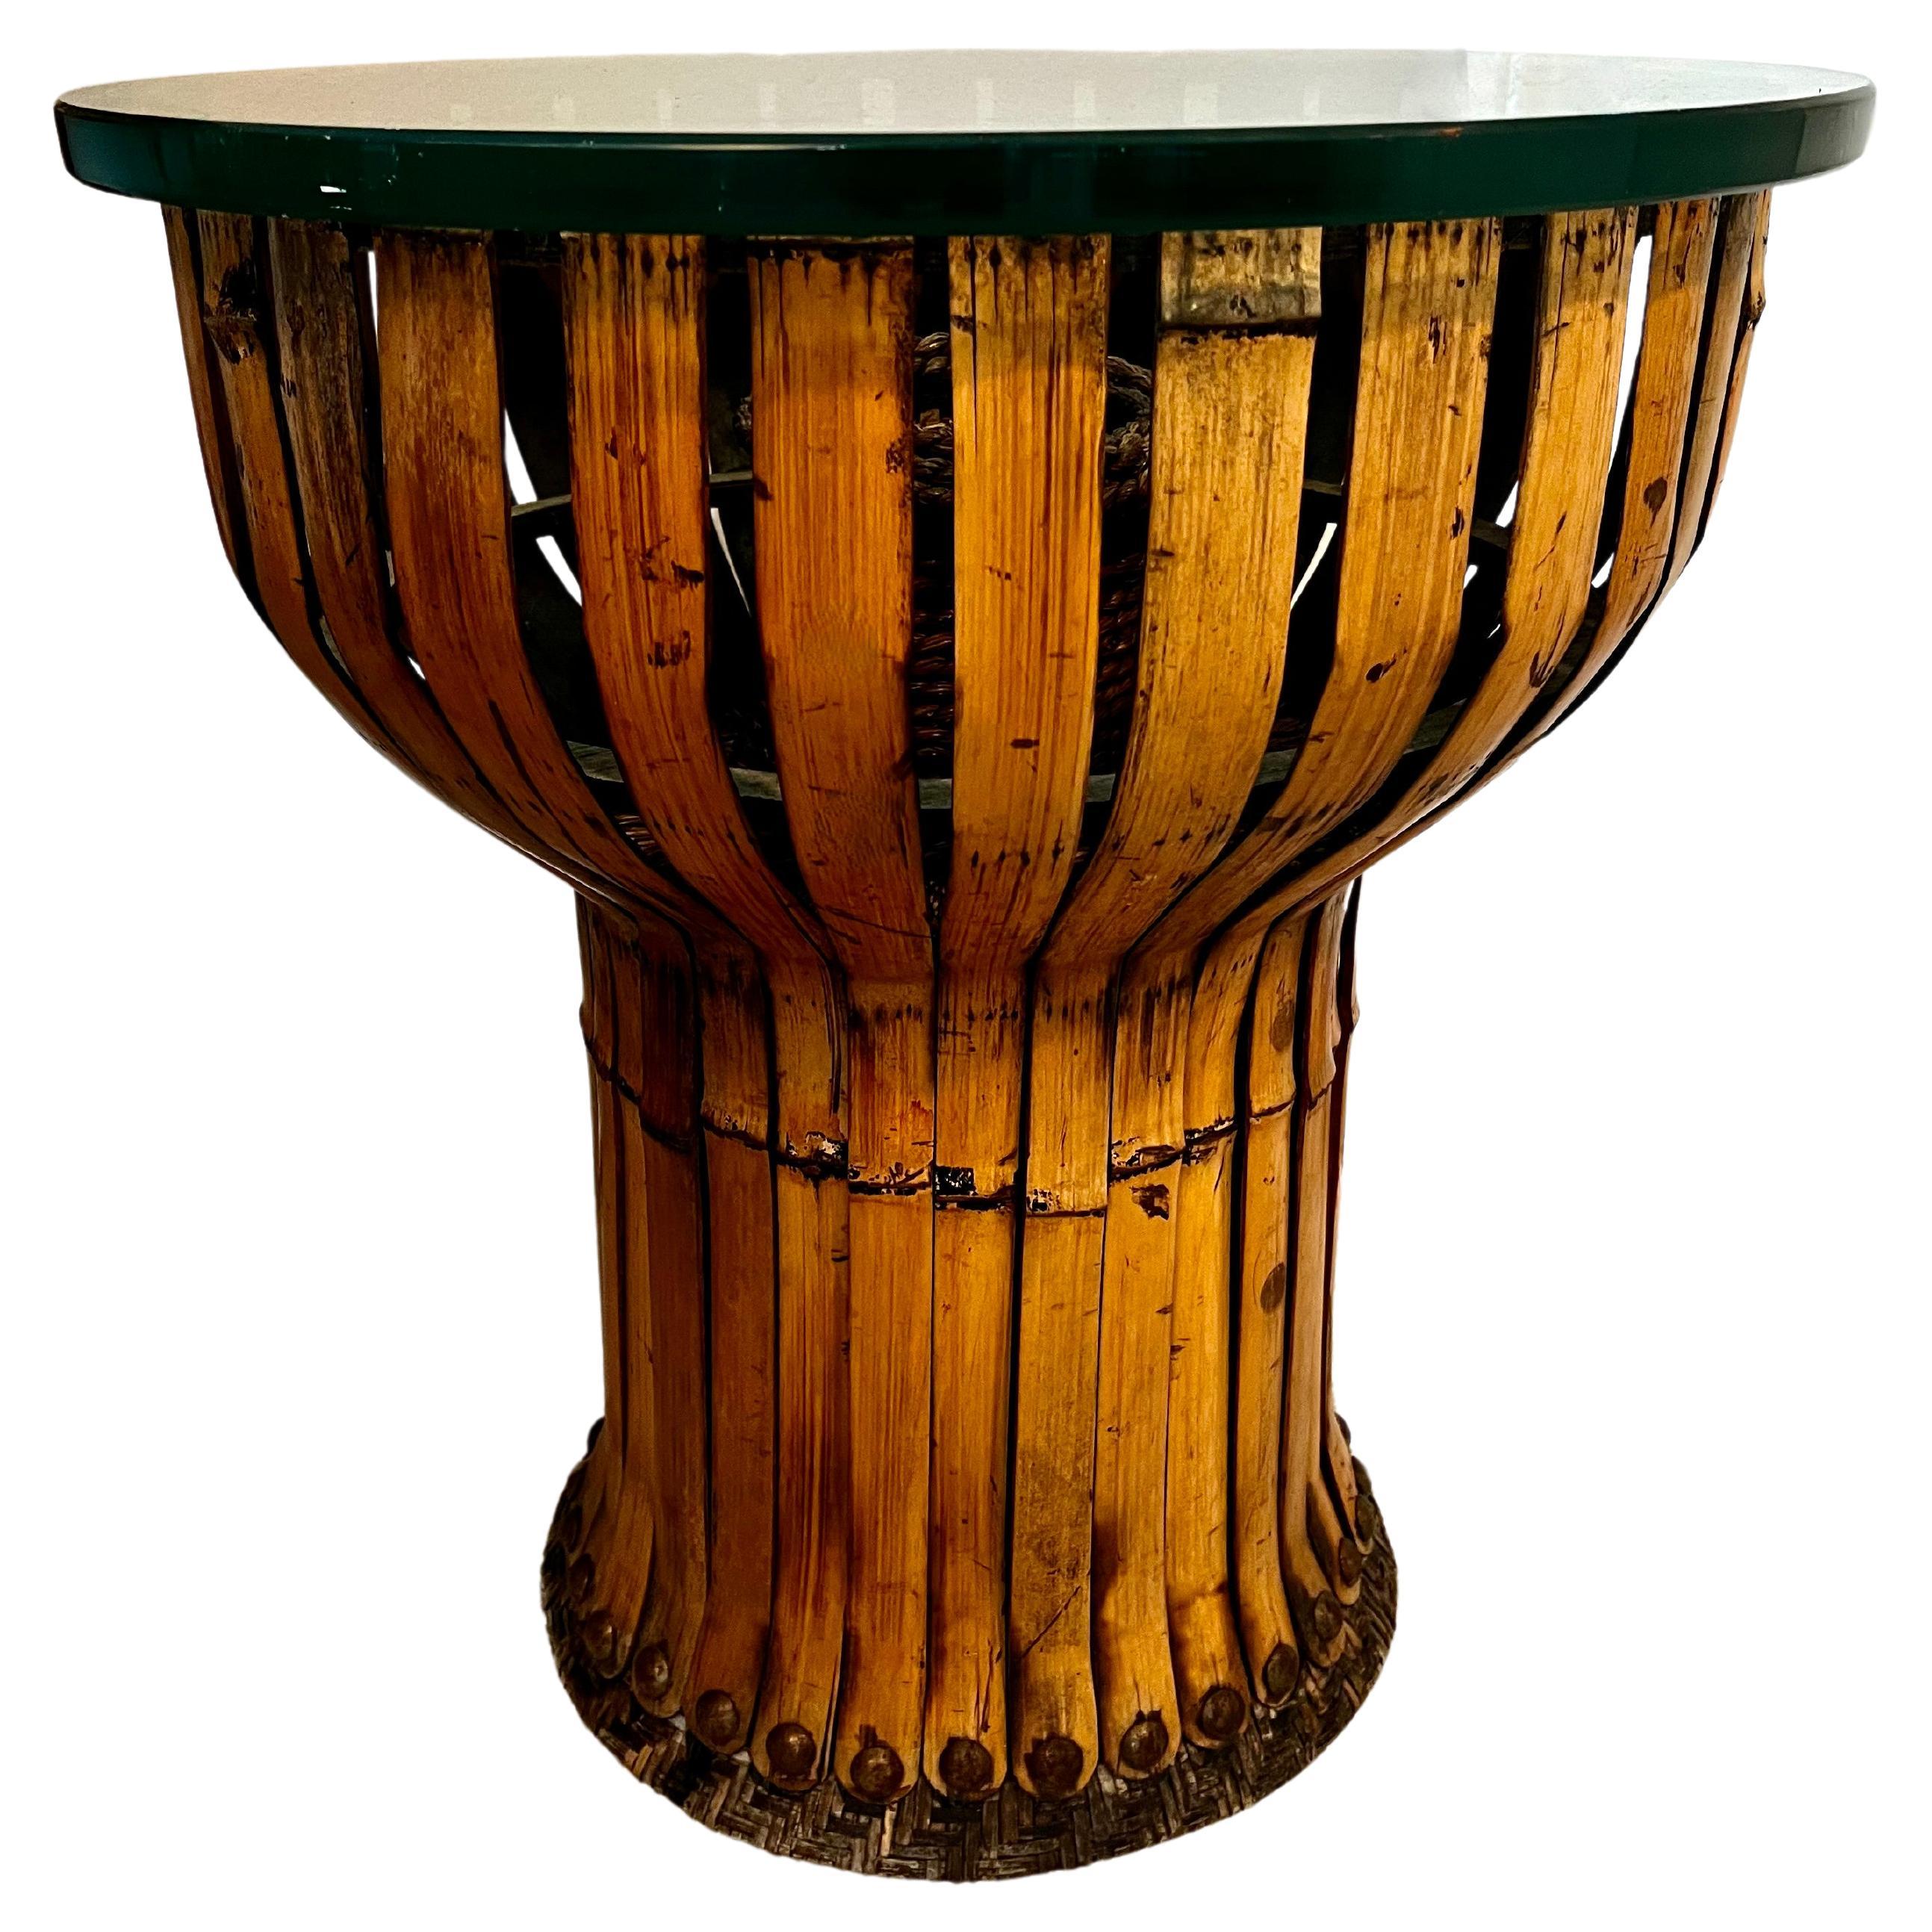 Bent Bamboo Side Table with Woven Grass Inside and Nail Head Details